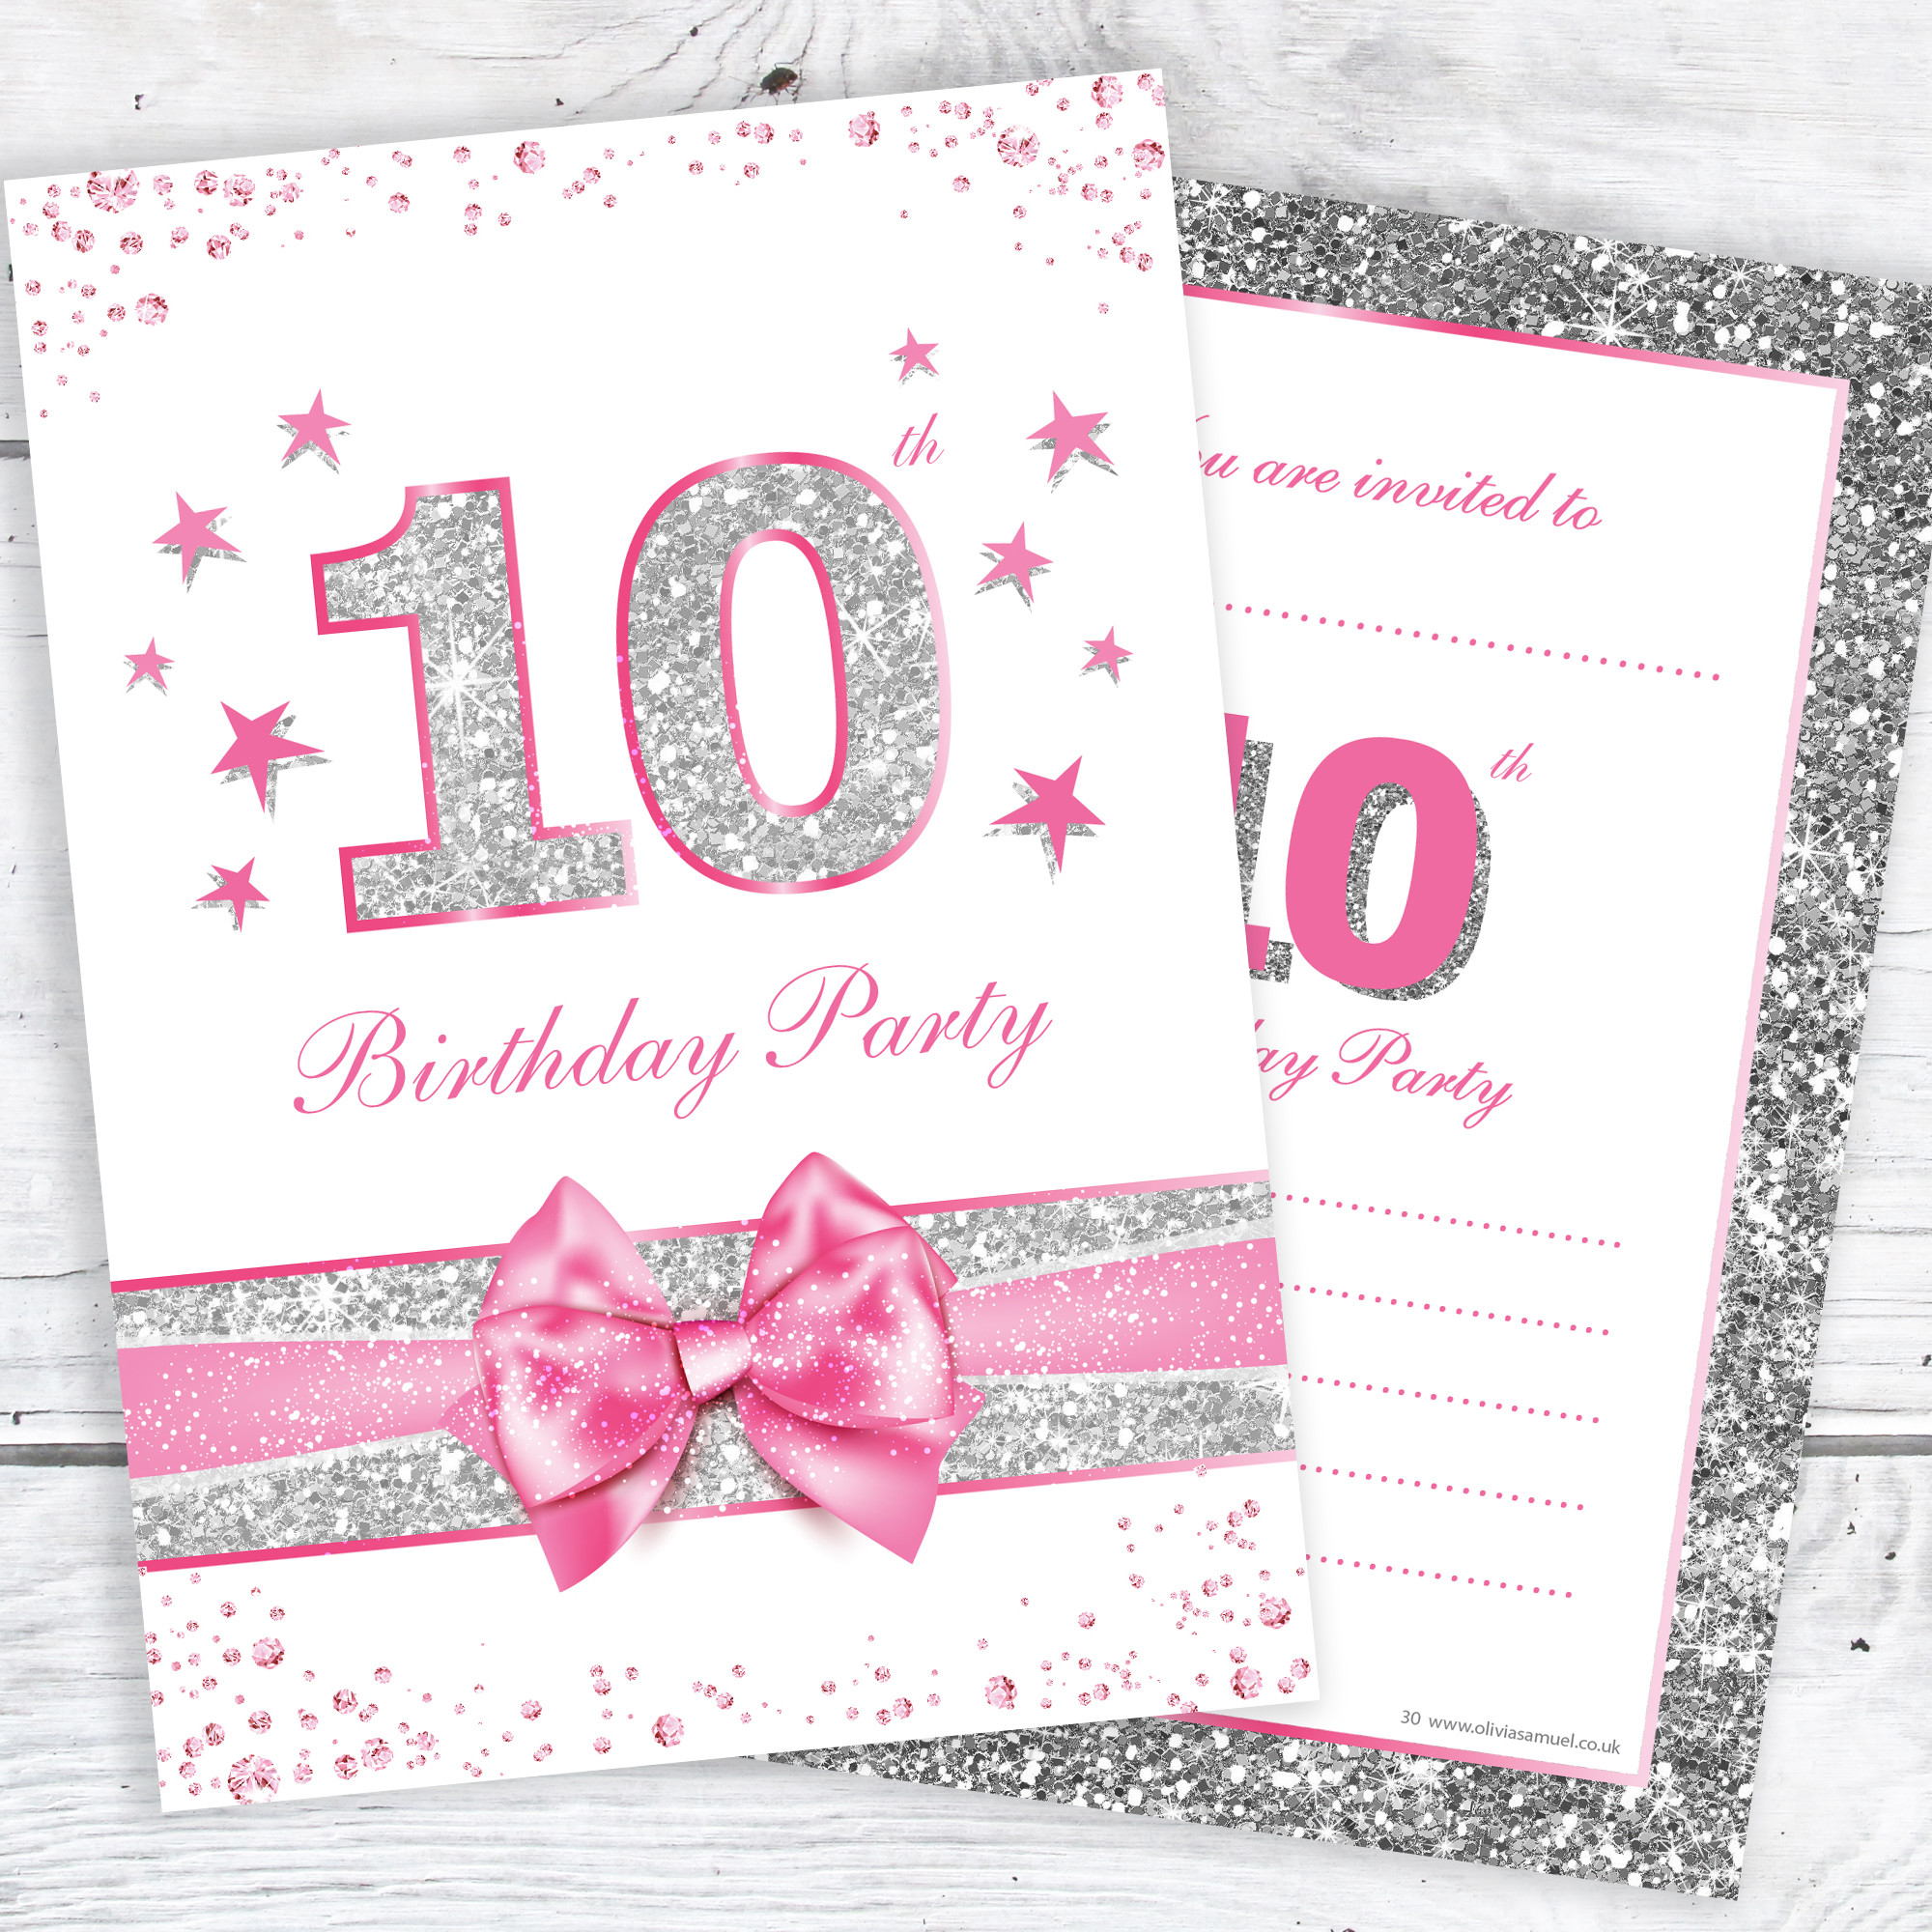 10th Birthday Party Invitations
 10th Birthday Party Invitations – Pink Sparkly Design and